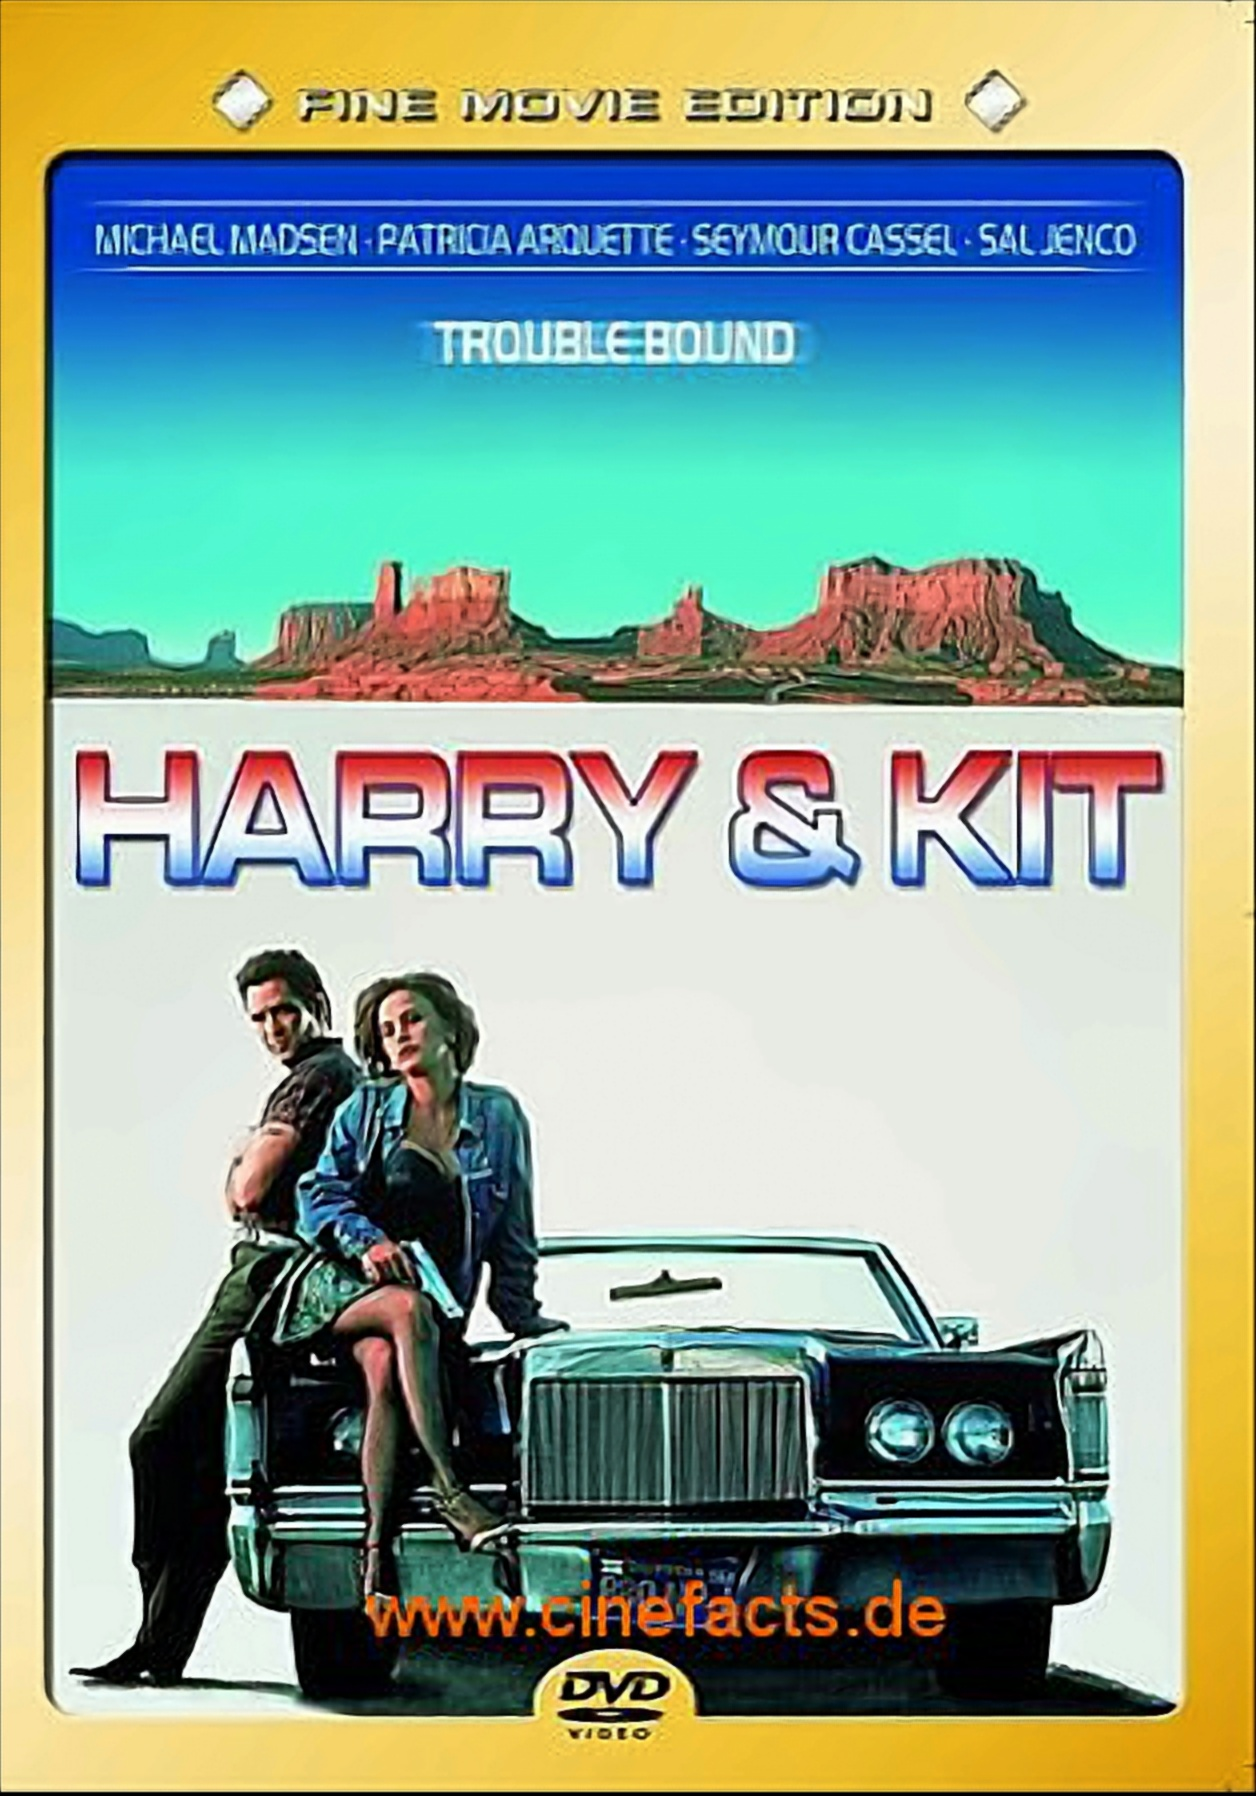 Harry & Kit Trouble - DVD Bound